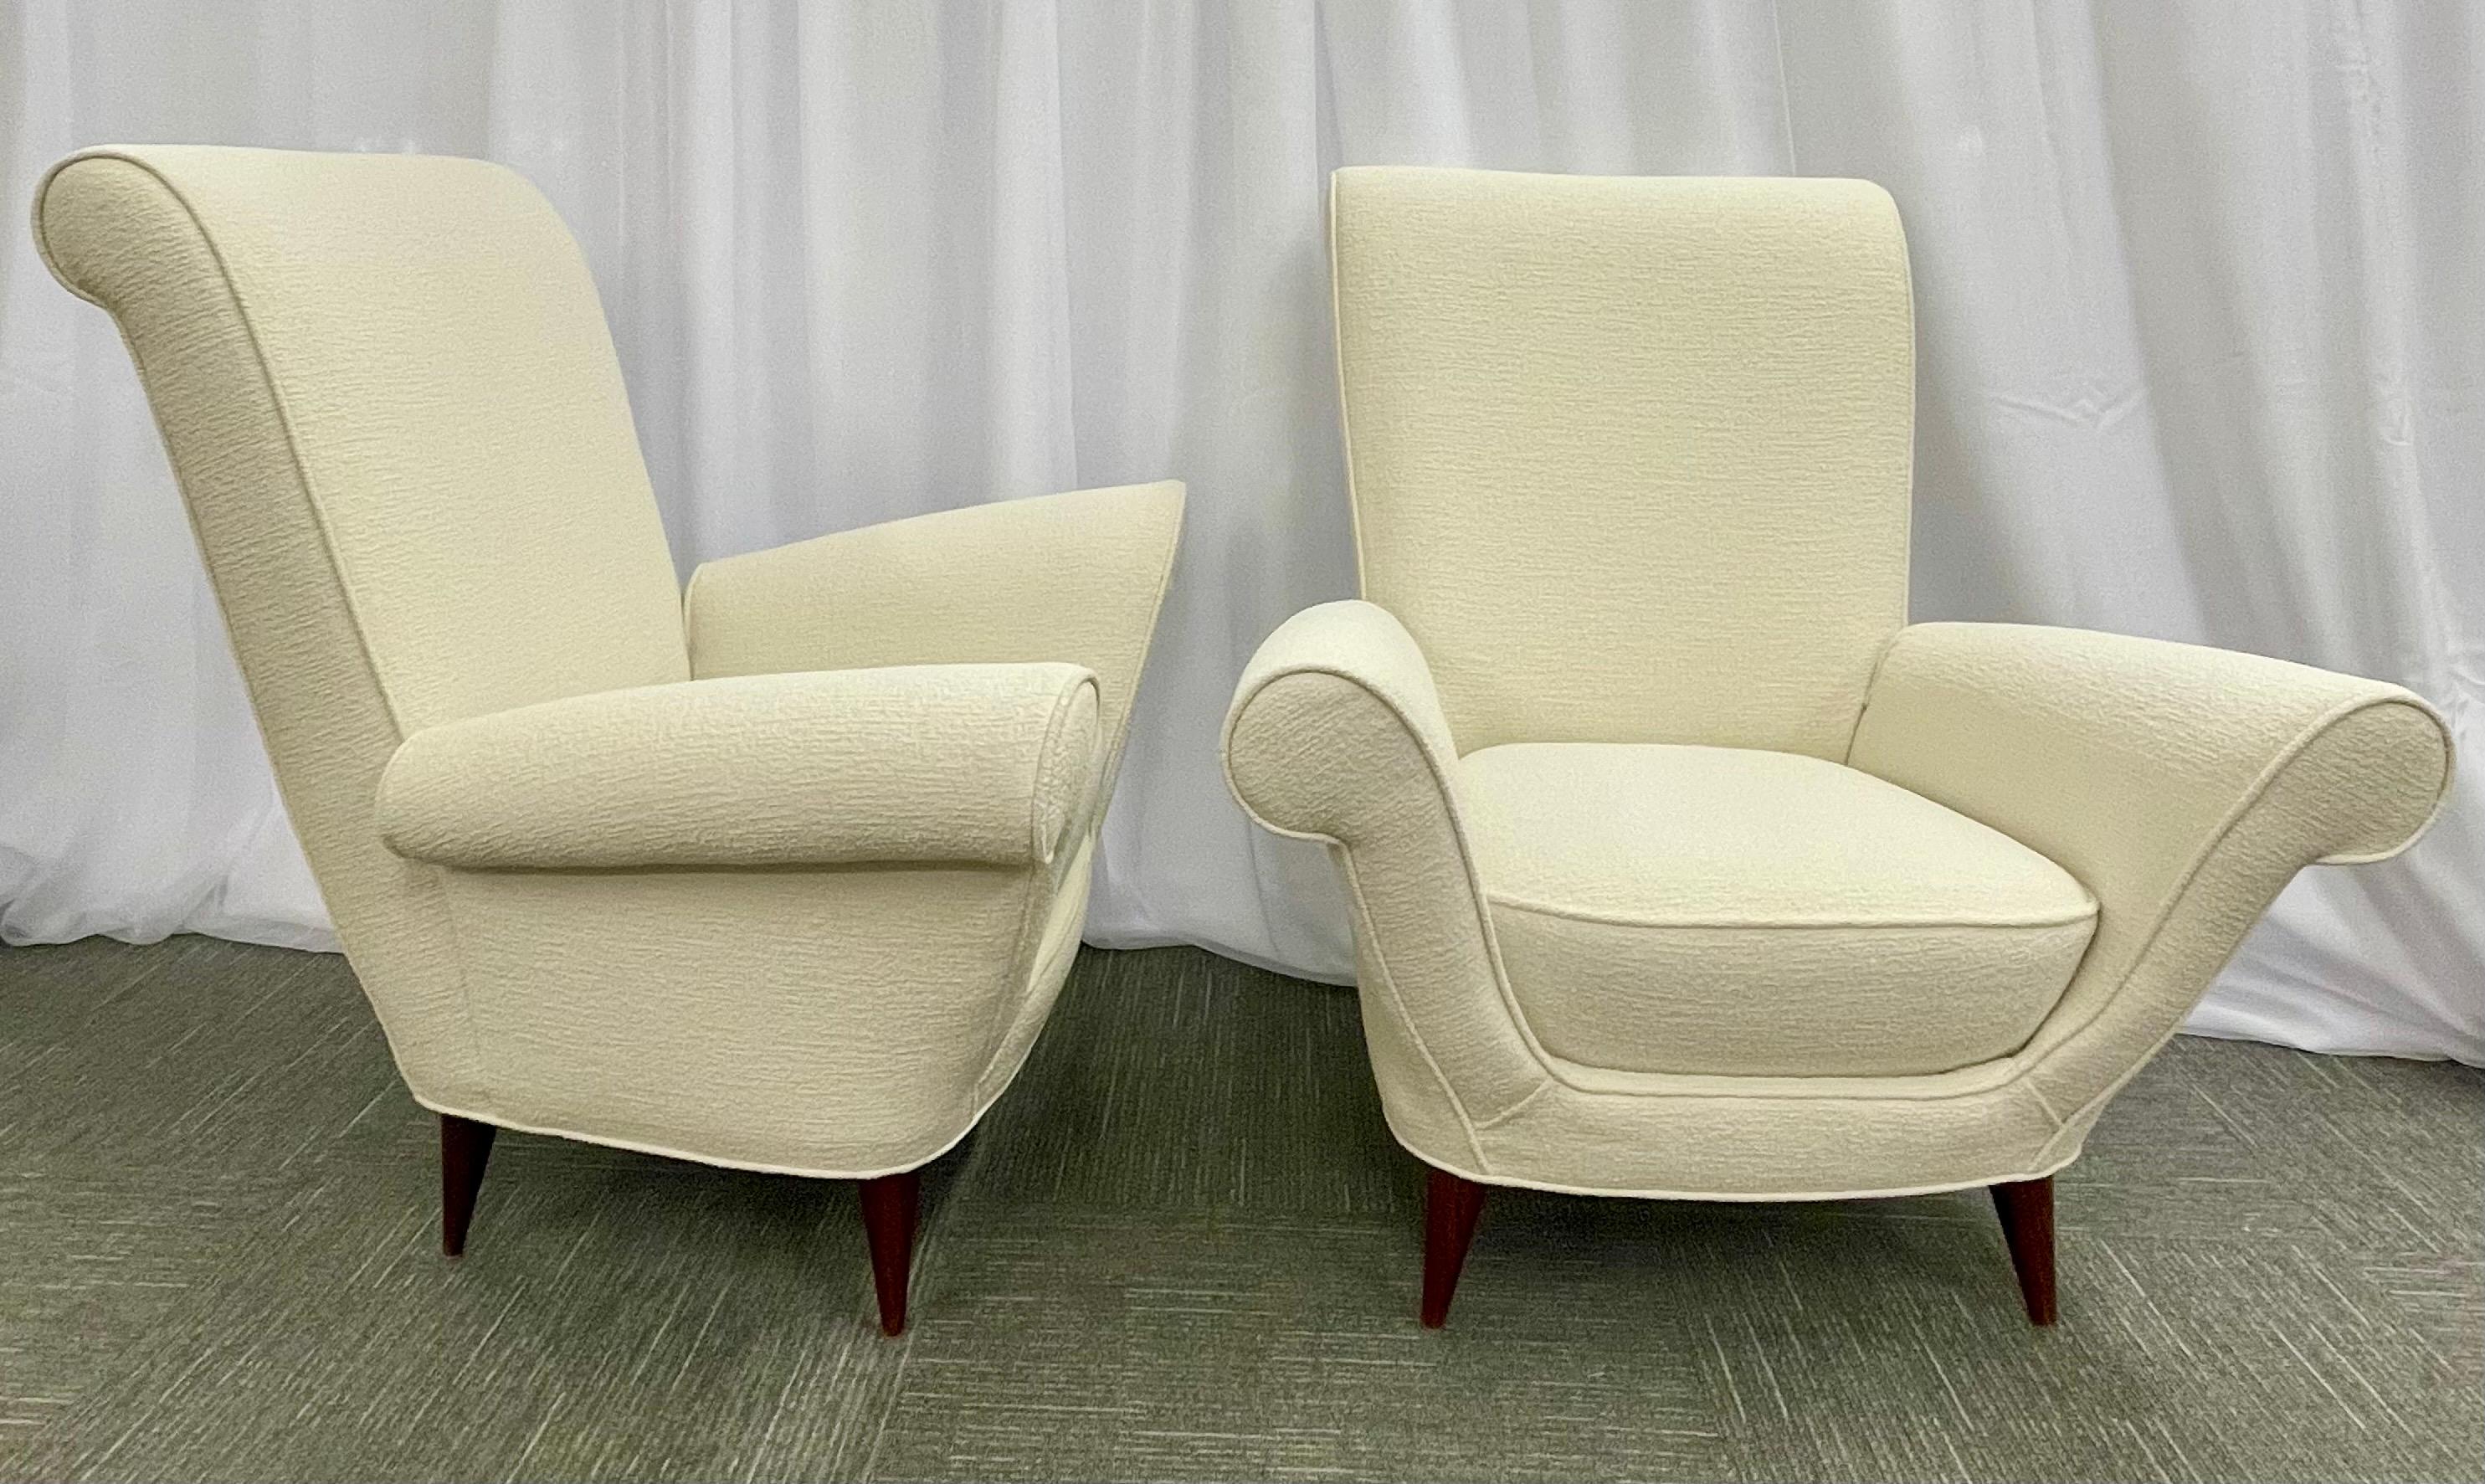 Pair of arm chairs in Italian in the style of Paolo Buffa newly reupholstered in a luxurious ivory Kavet Bouclé.
These sleek and stylish arm, lounge or wingback chairs are strong and sturdy. Each having the classic angled legs supporting a large U